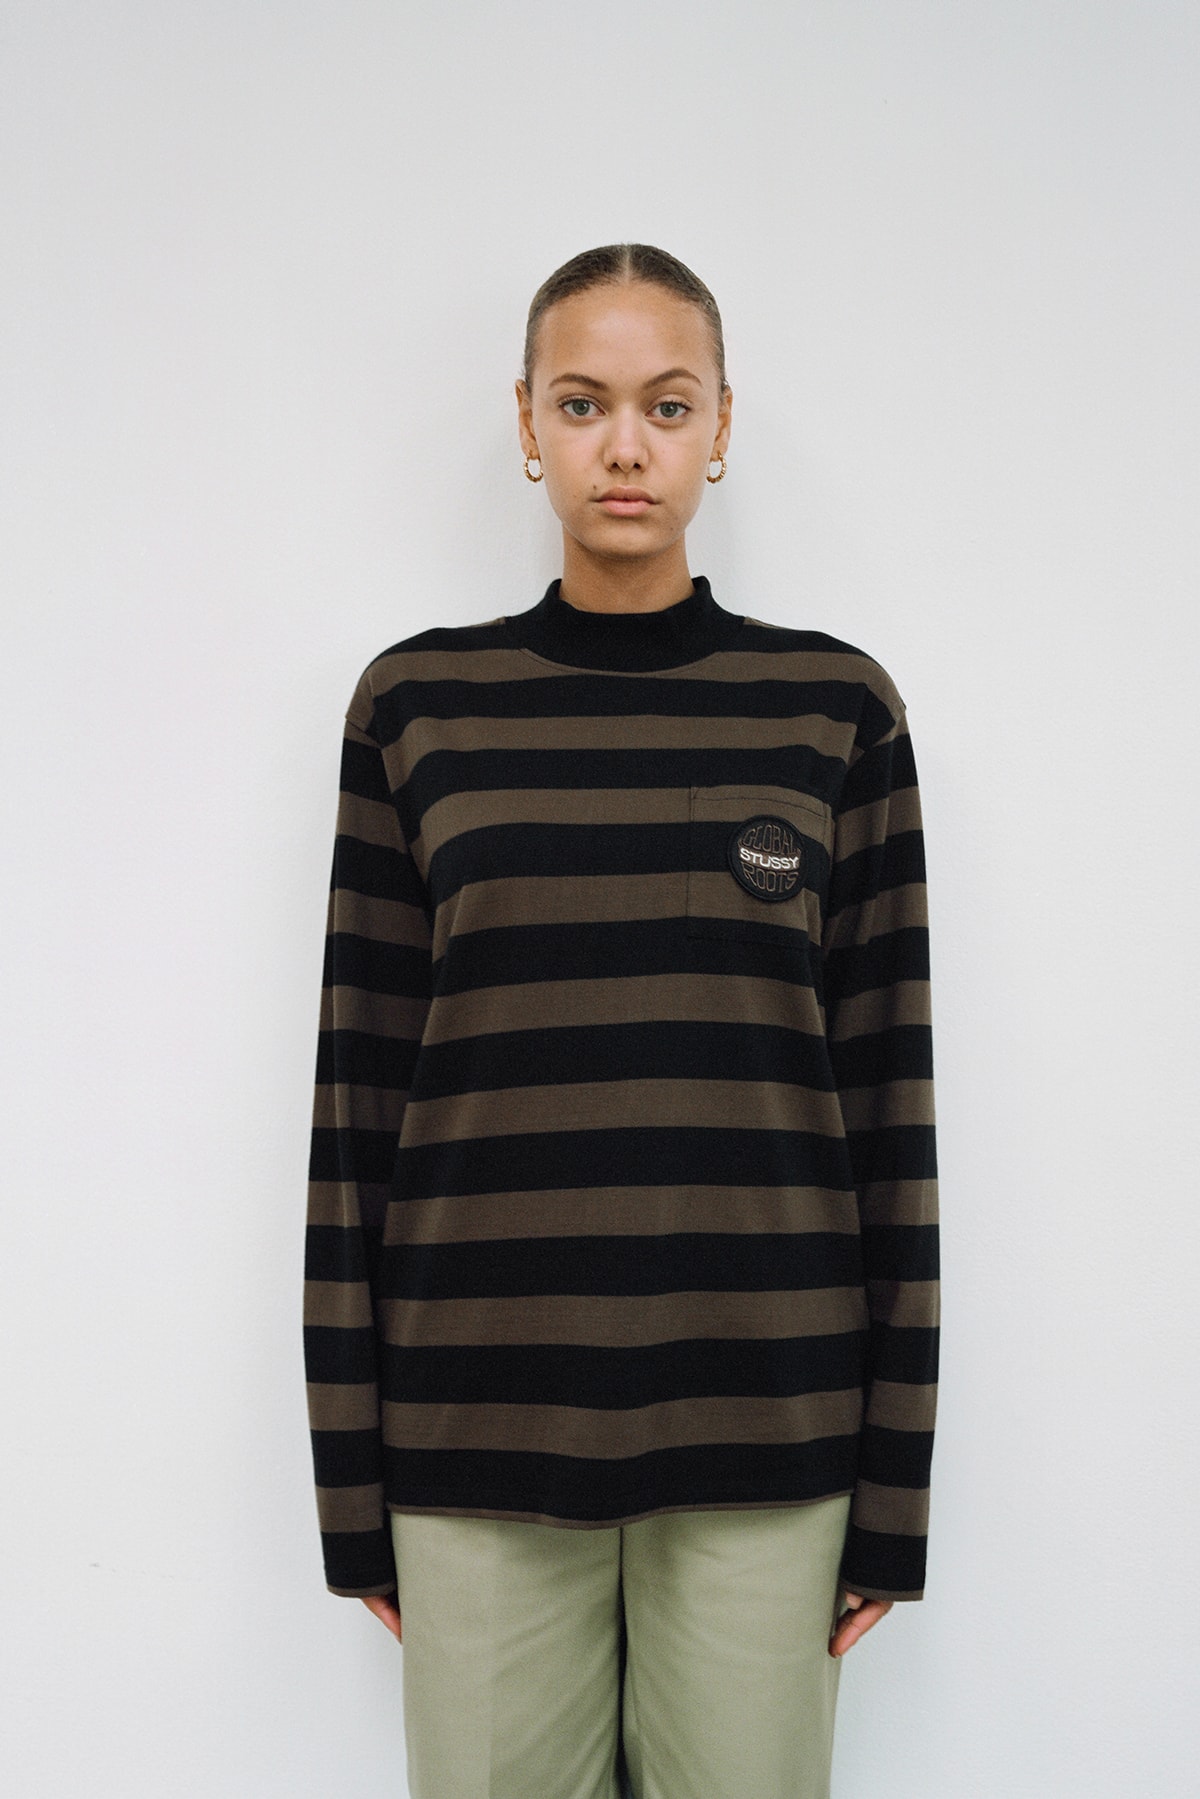 Stussy Women's Holiday 2018 Collection Lookbook Logo Striped Shirt Brown Black